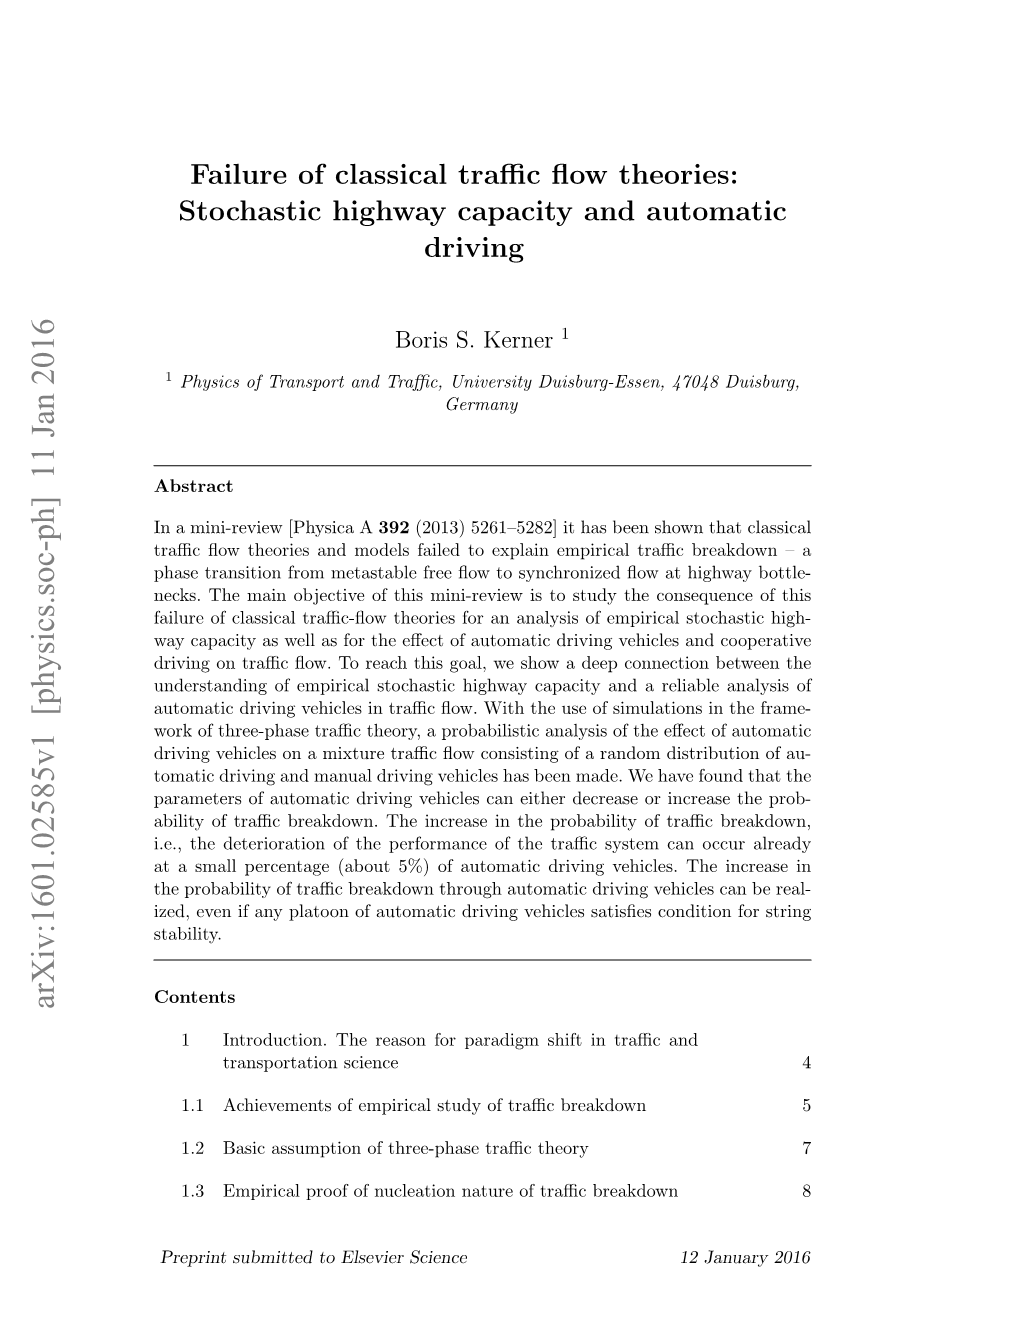 Failure of Classical Traffic Flow Theories: Stochastic Highway